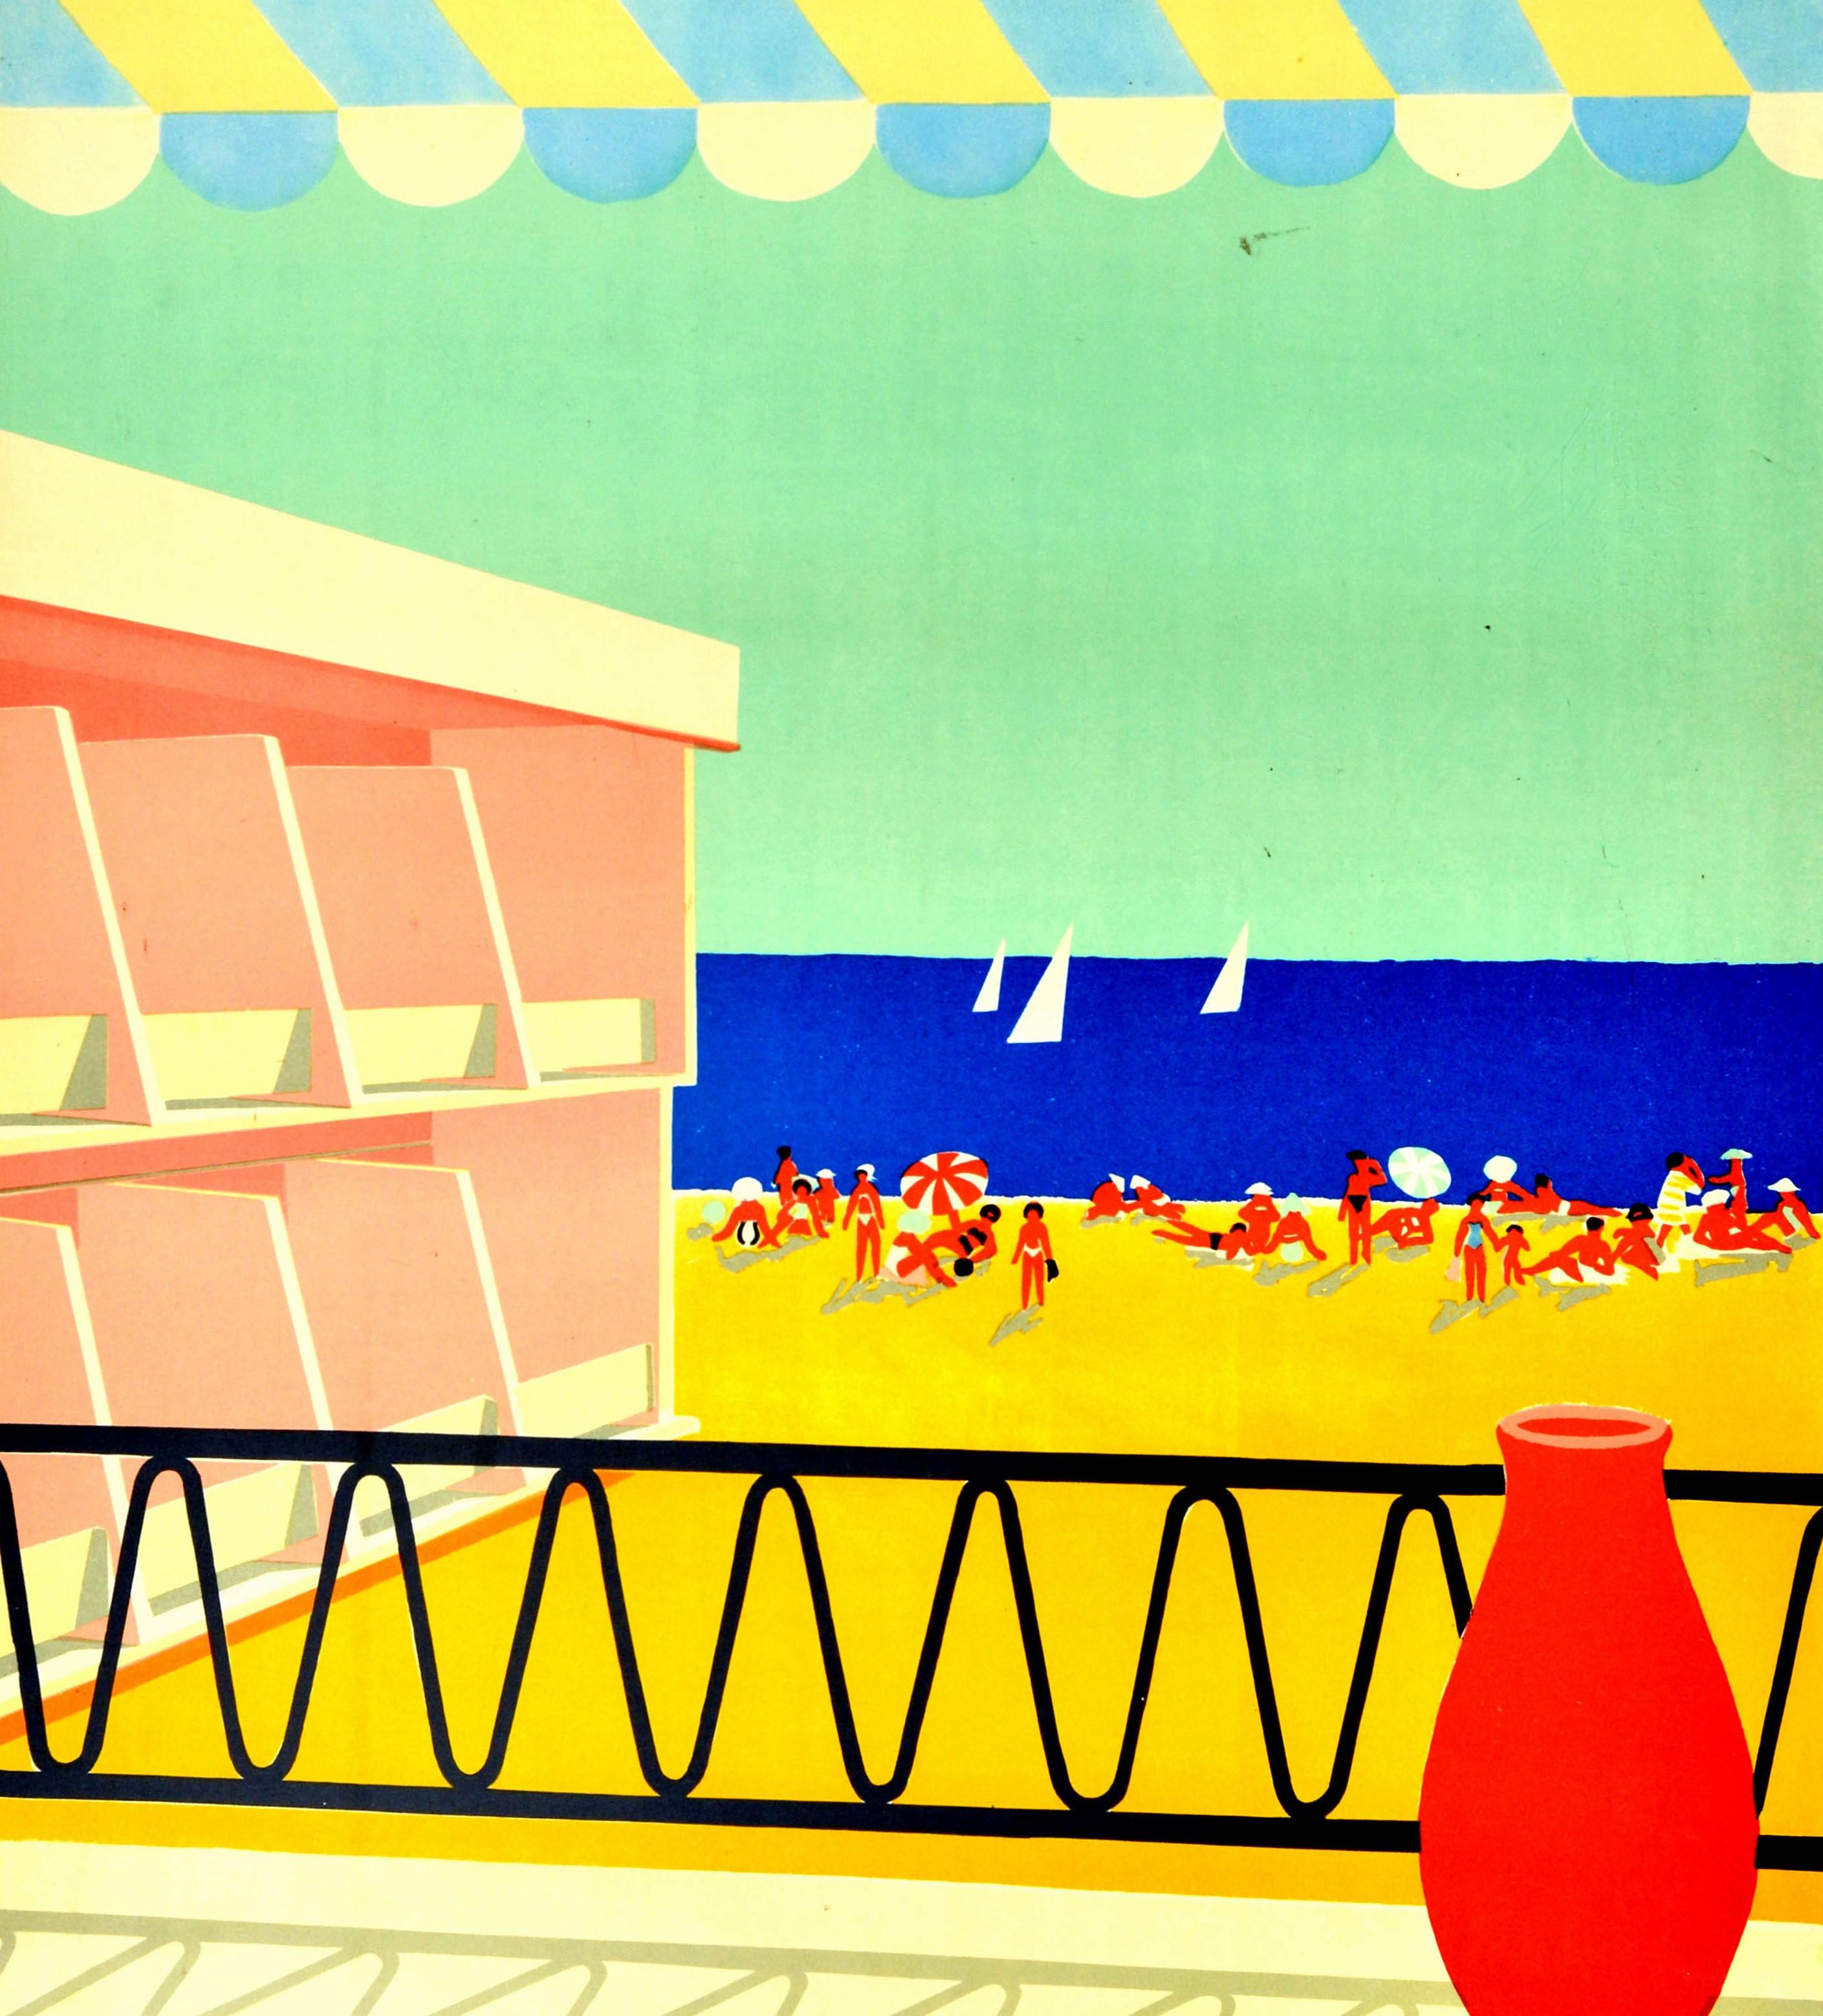 Original vintage travel advertising poster for Солнечный Берег Болгария Балкантурист / The Sunny Beach Bulgaria Balkantourist featuring a modernist style design of a scenic view from a balcony of people sunbathing and enjoying their holiday on a